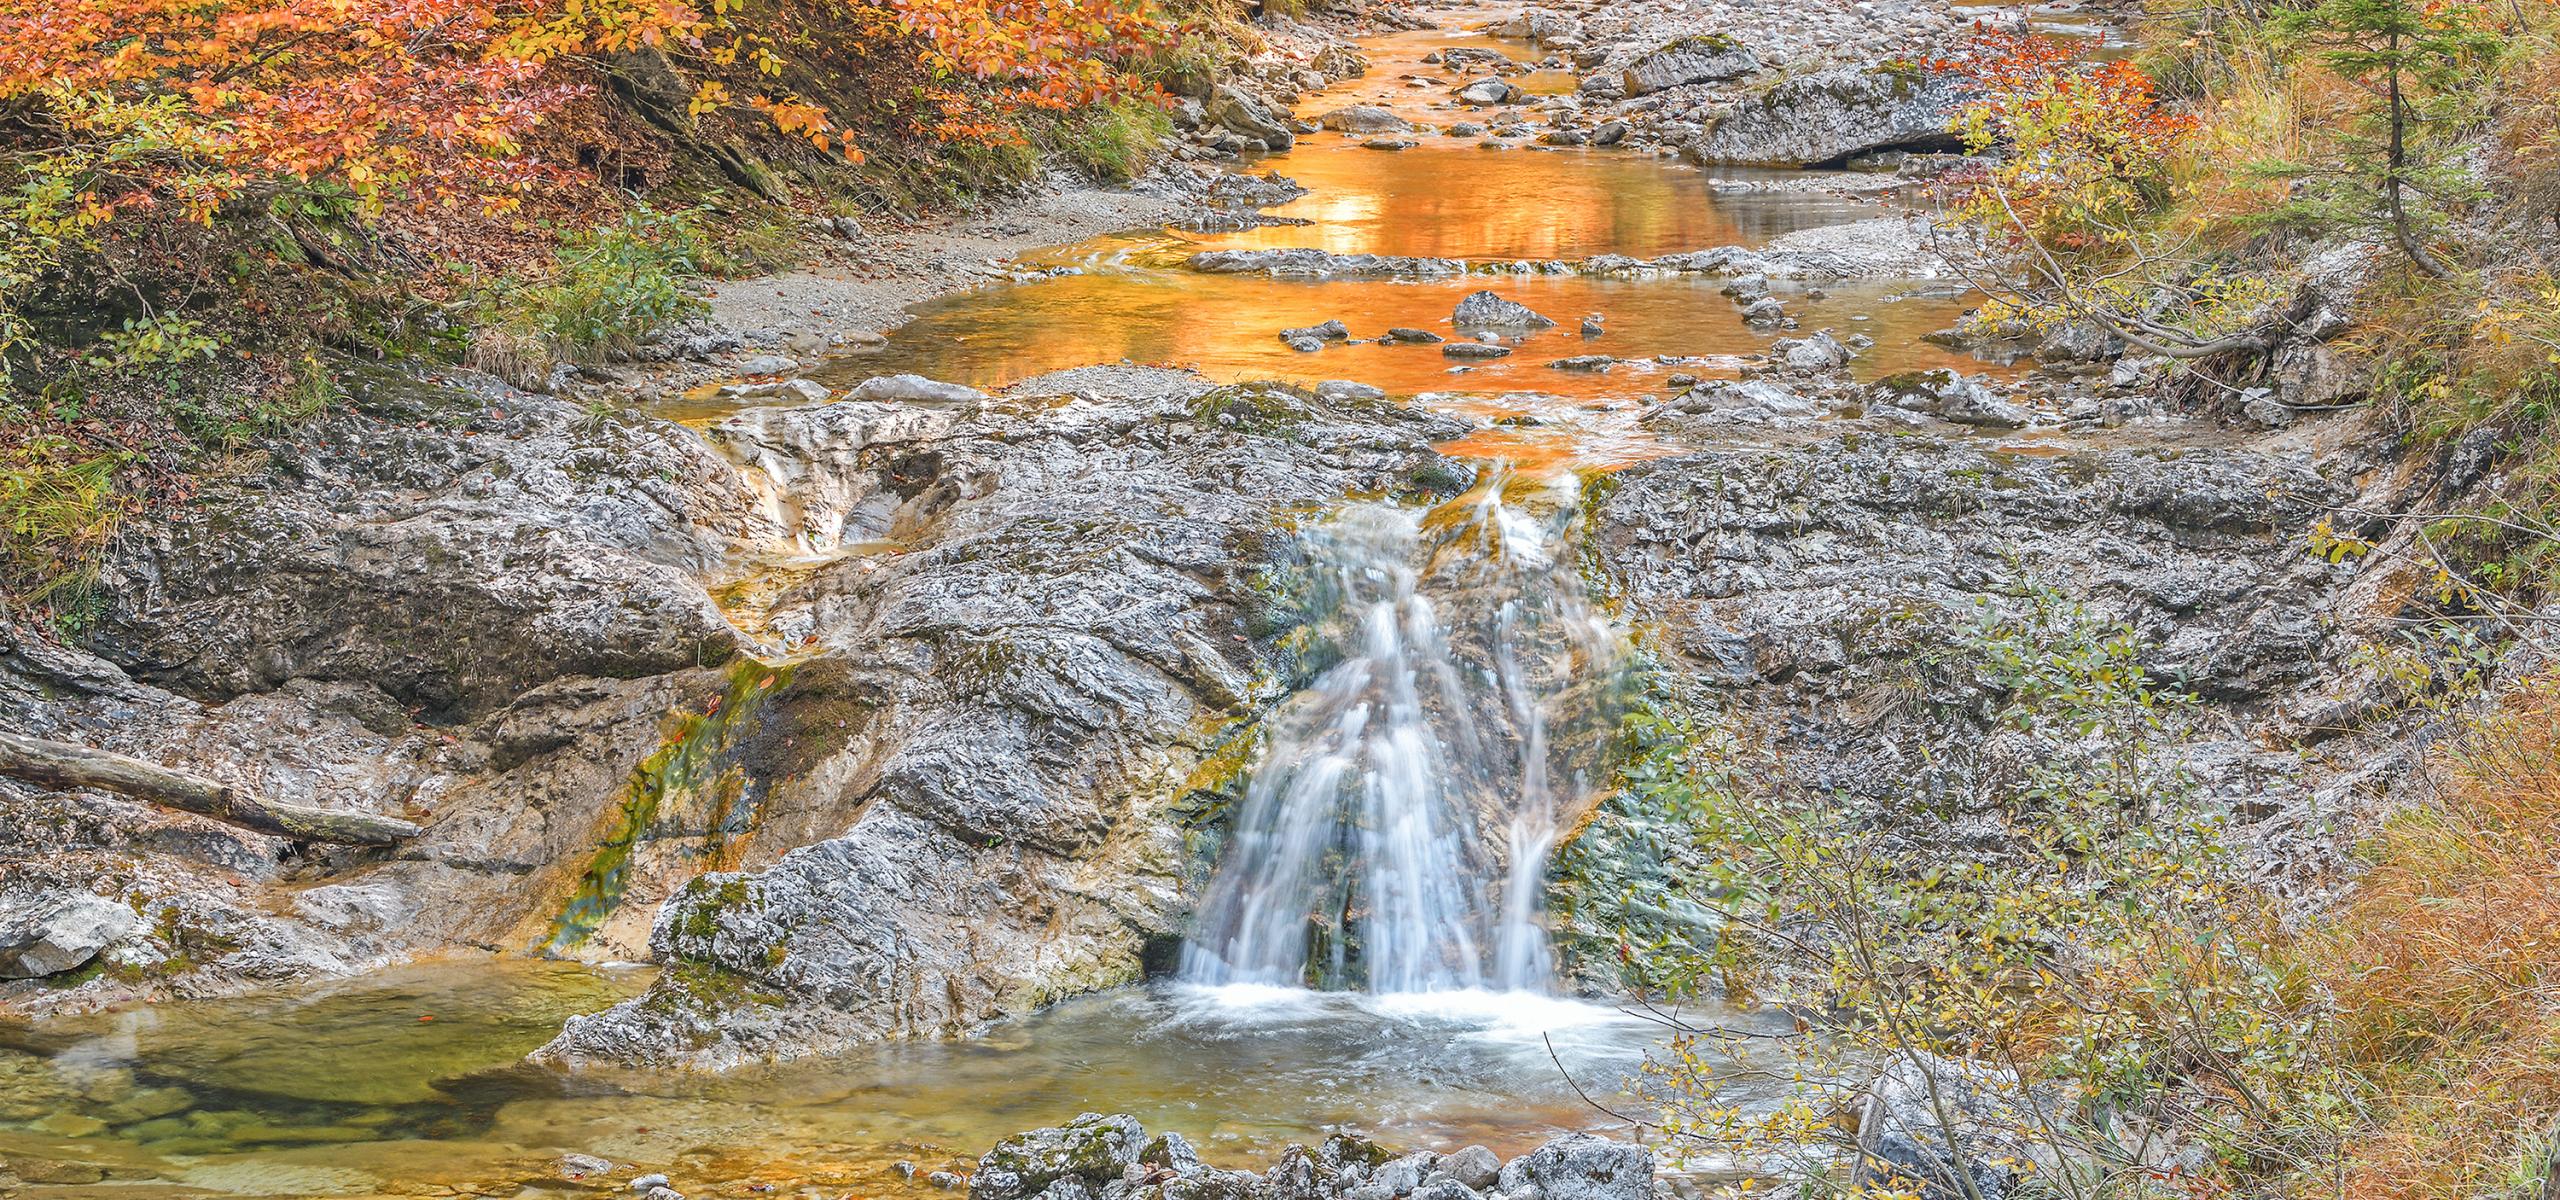 The colorful foliage is reflected in the upper reaches of the Krumme Steyrling in autumn Kalkalpen National Park.